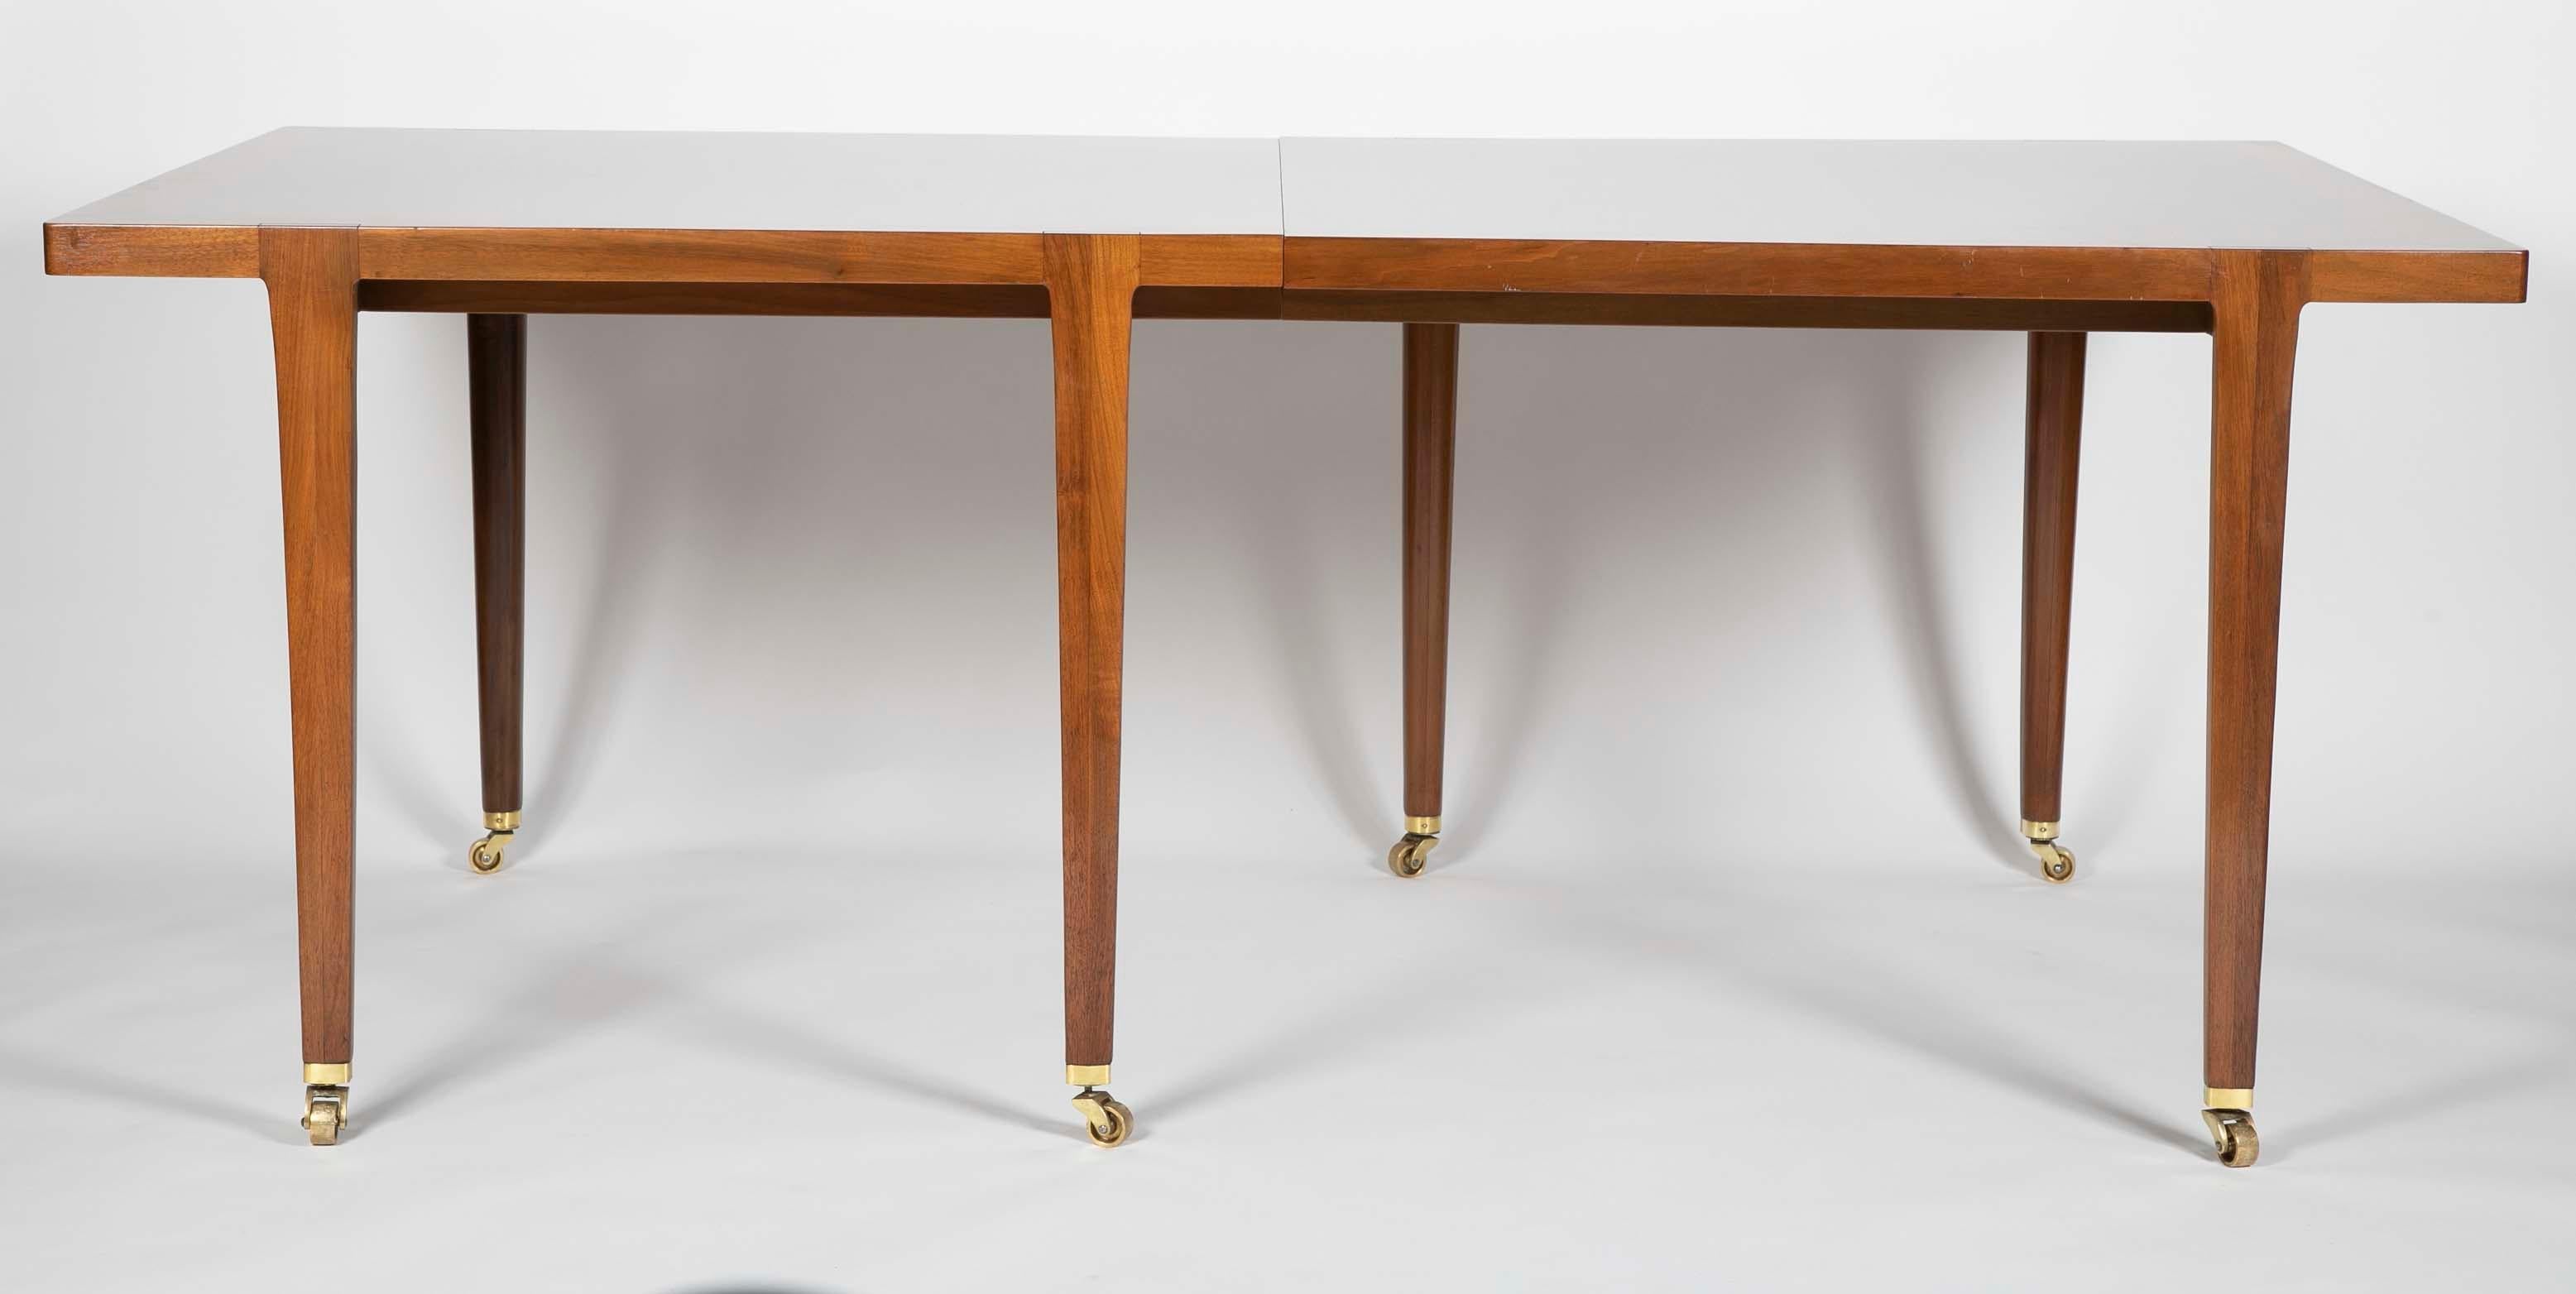 American Edward Wormley for Dunbar Walnut Dining Table with Two Leaves